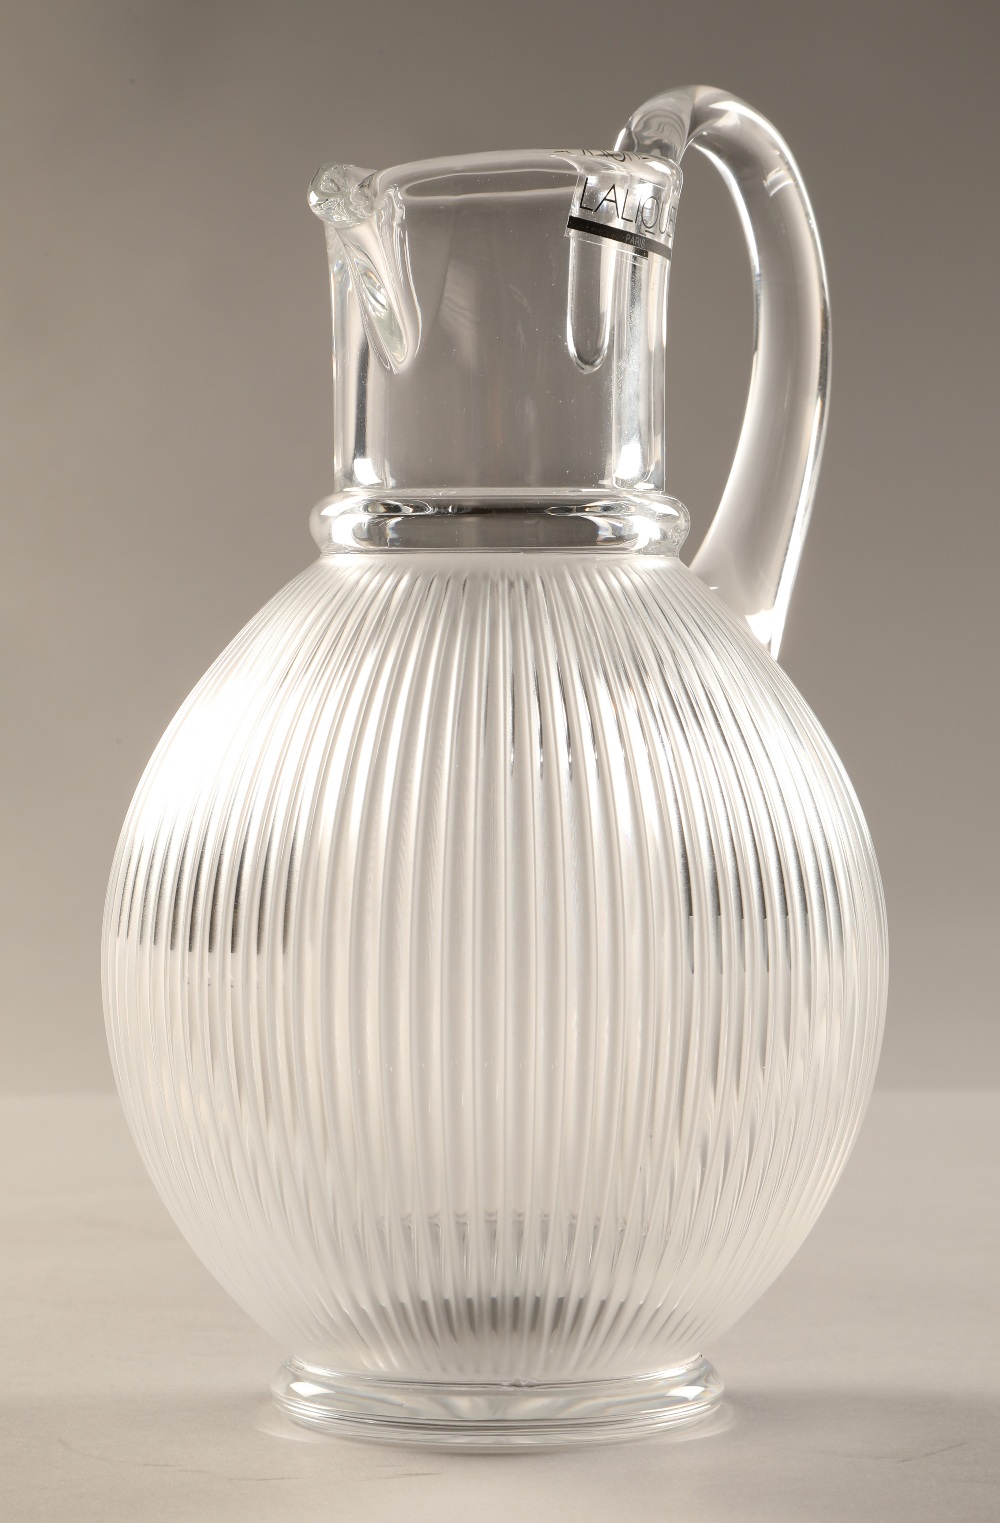 Lalique Langeais Pitcher, etched Lalique France to the base, 22 cm high, in Lalique box - Image 2 of 3